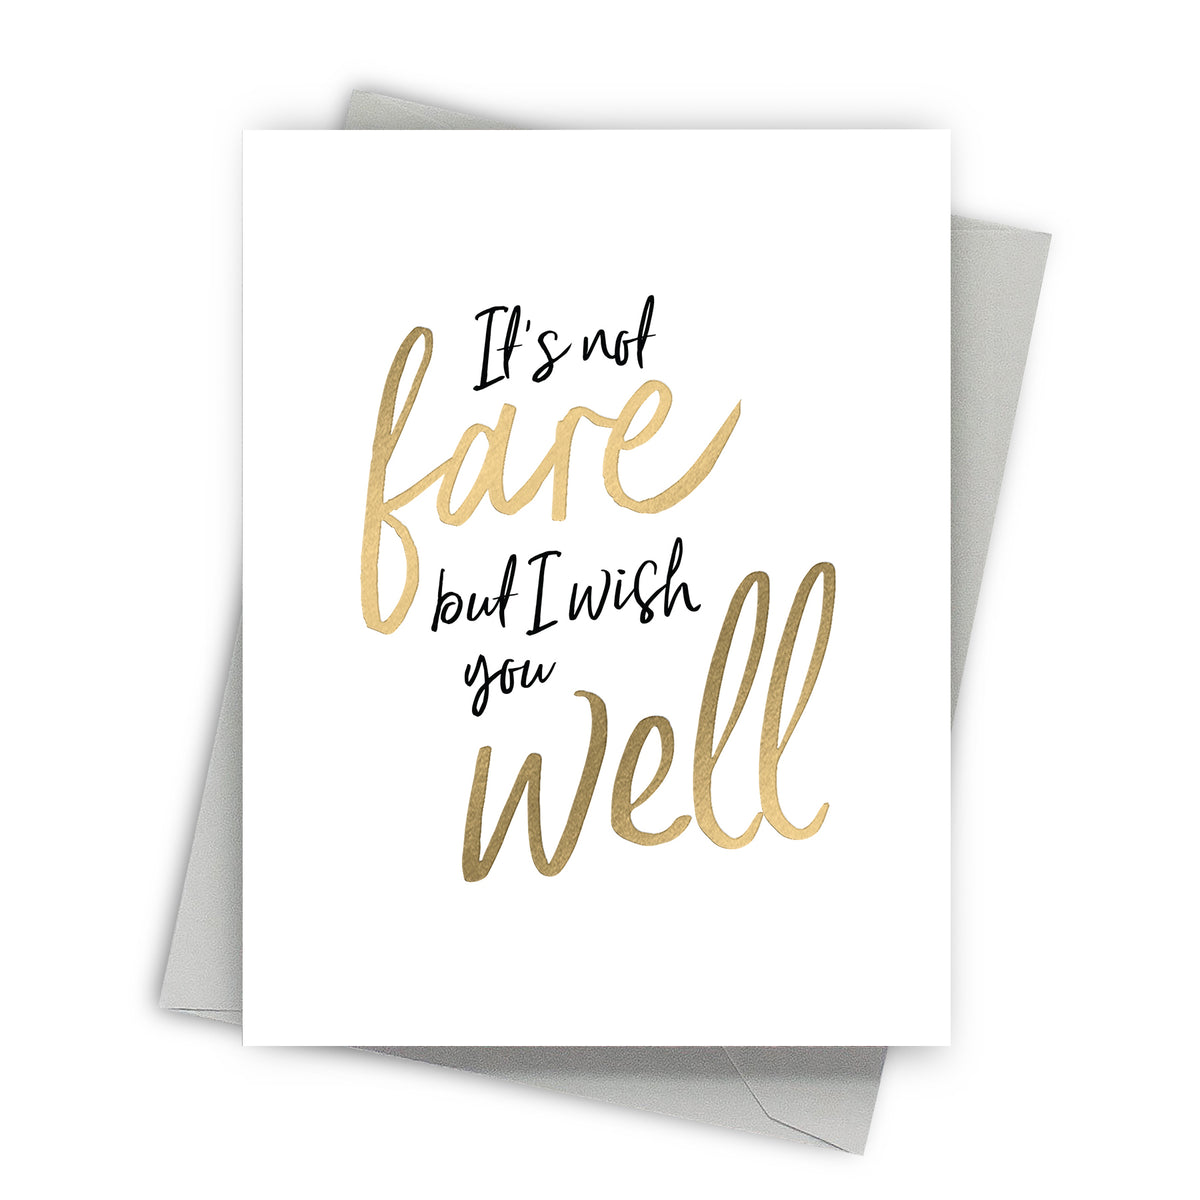 Farewell Wishes Encouragement Card by Fine Moments